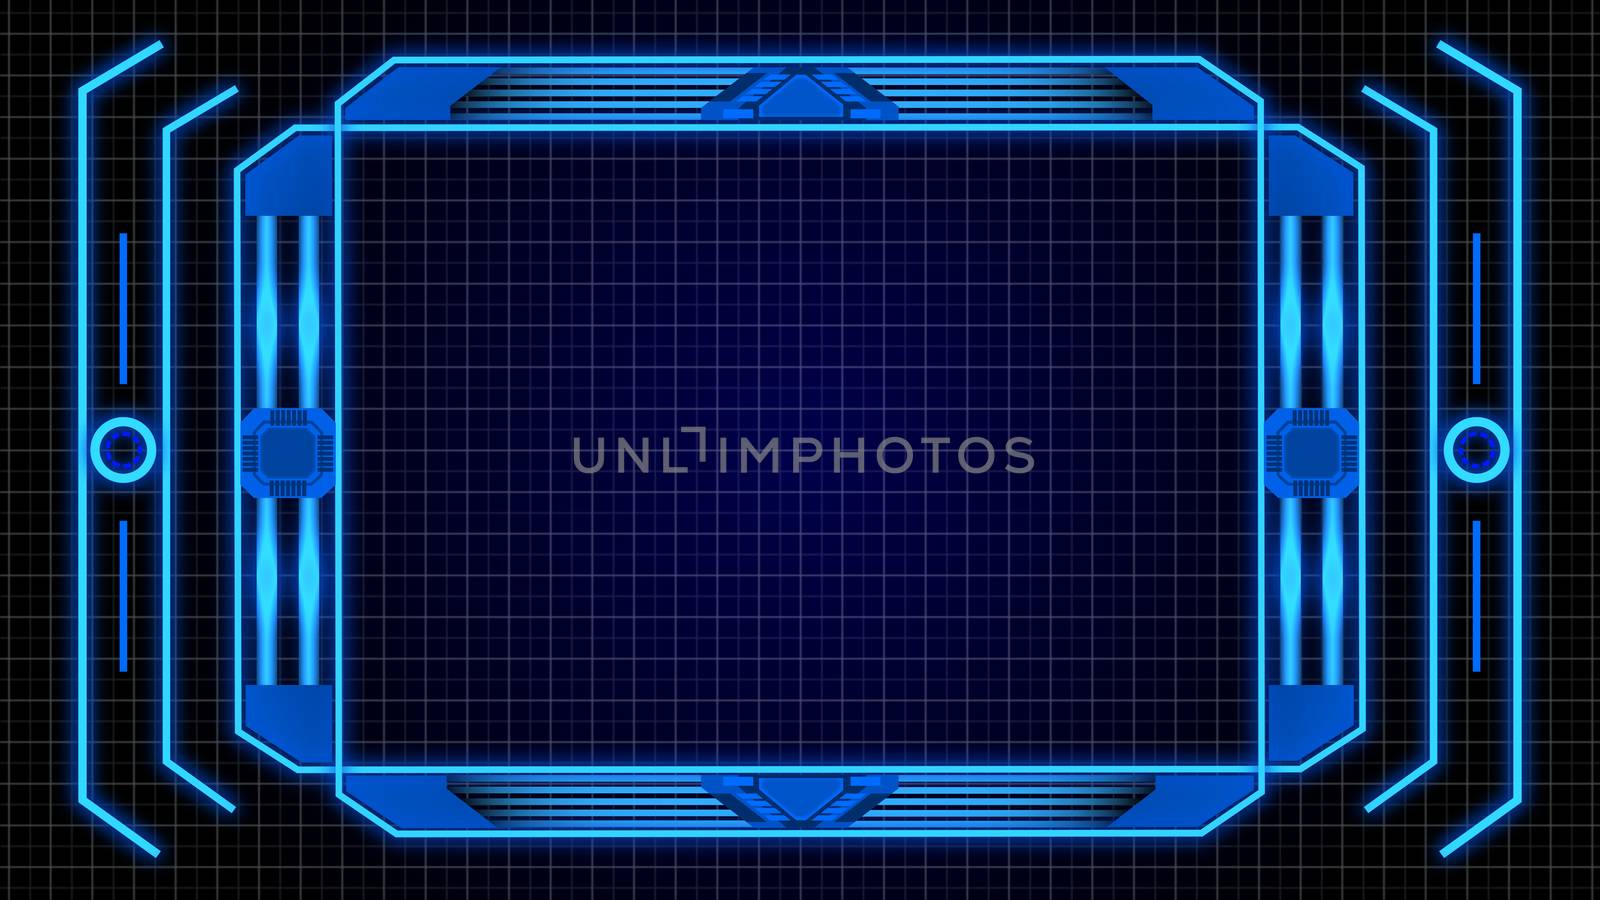 Monitor Screen Border With Blue Digital Elements Details and Grid Abstract Background by ariya23156